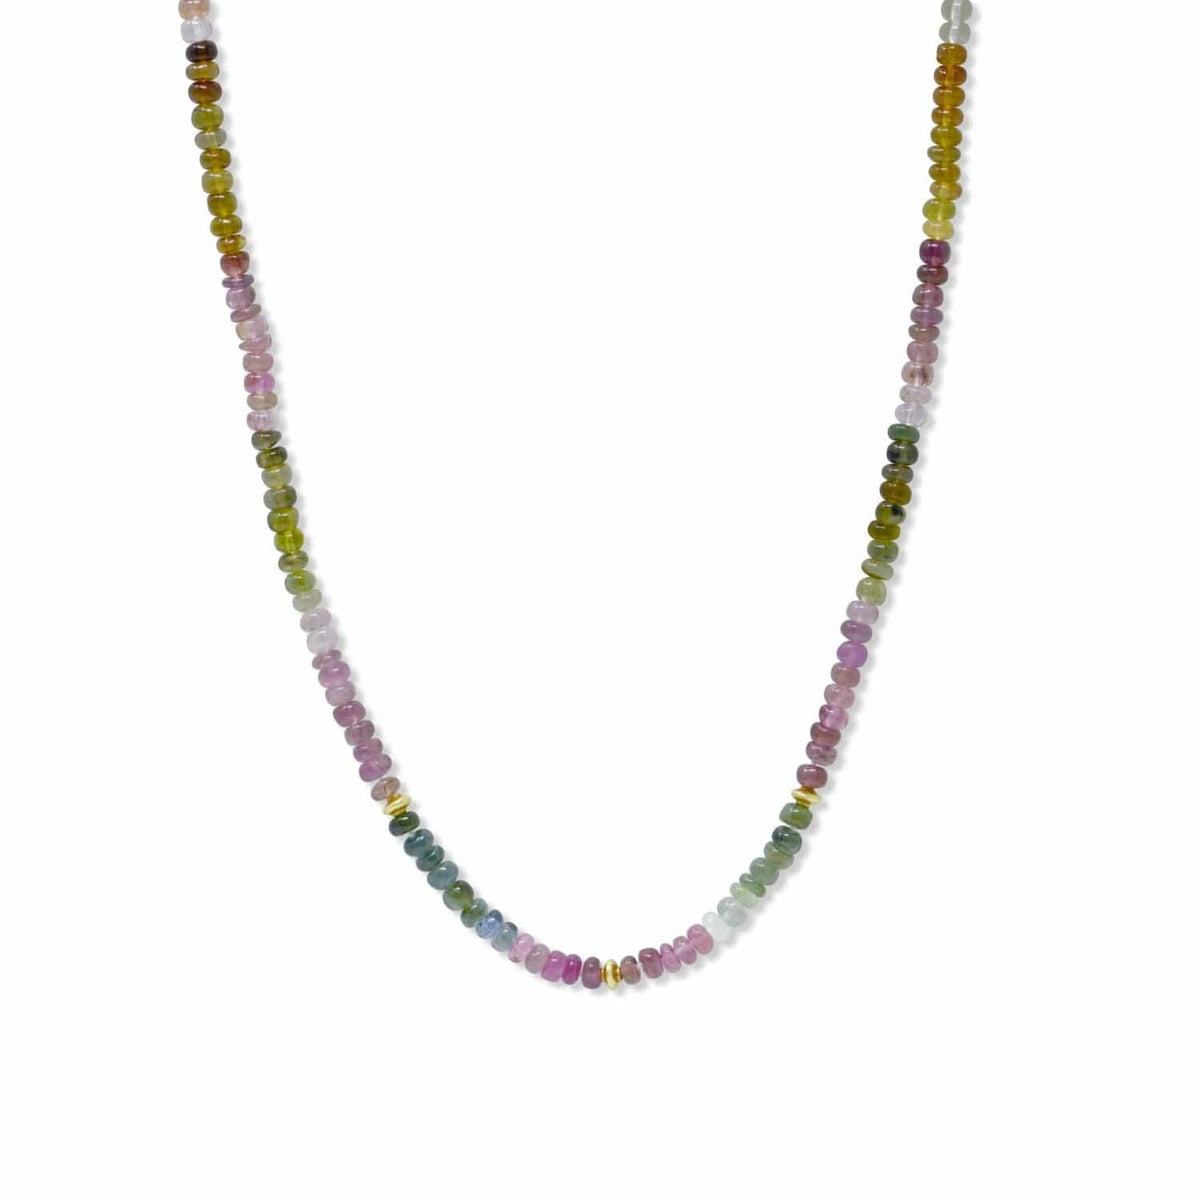 18K & 14K Yellow Gold Smooth Multicolored Tourmaline Rondelle Necklace